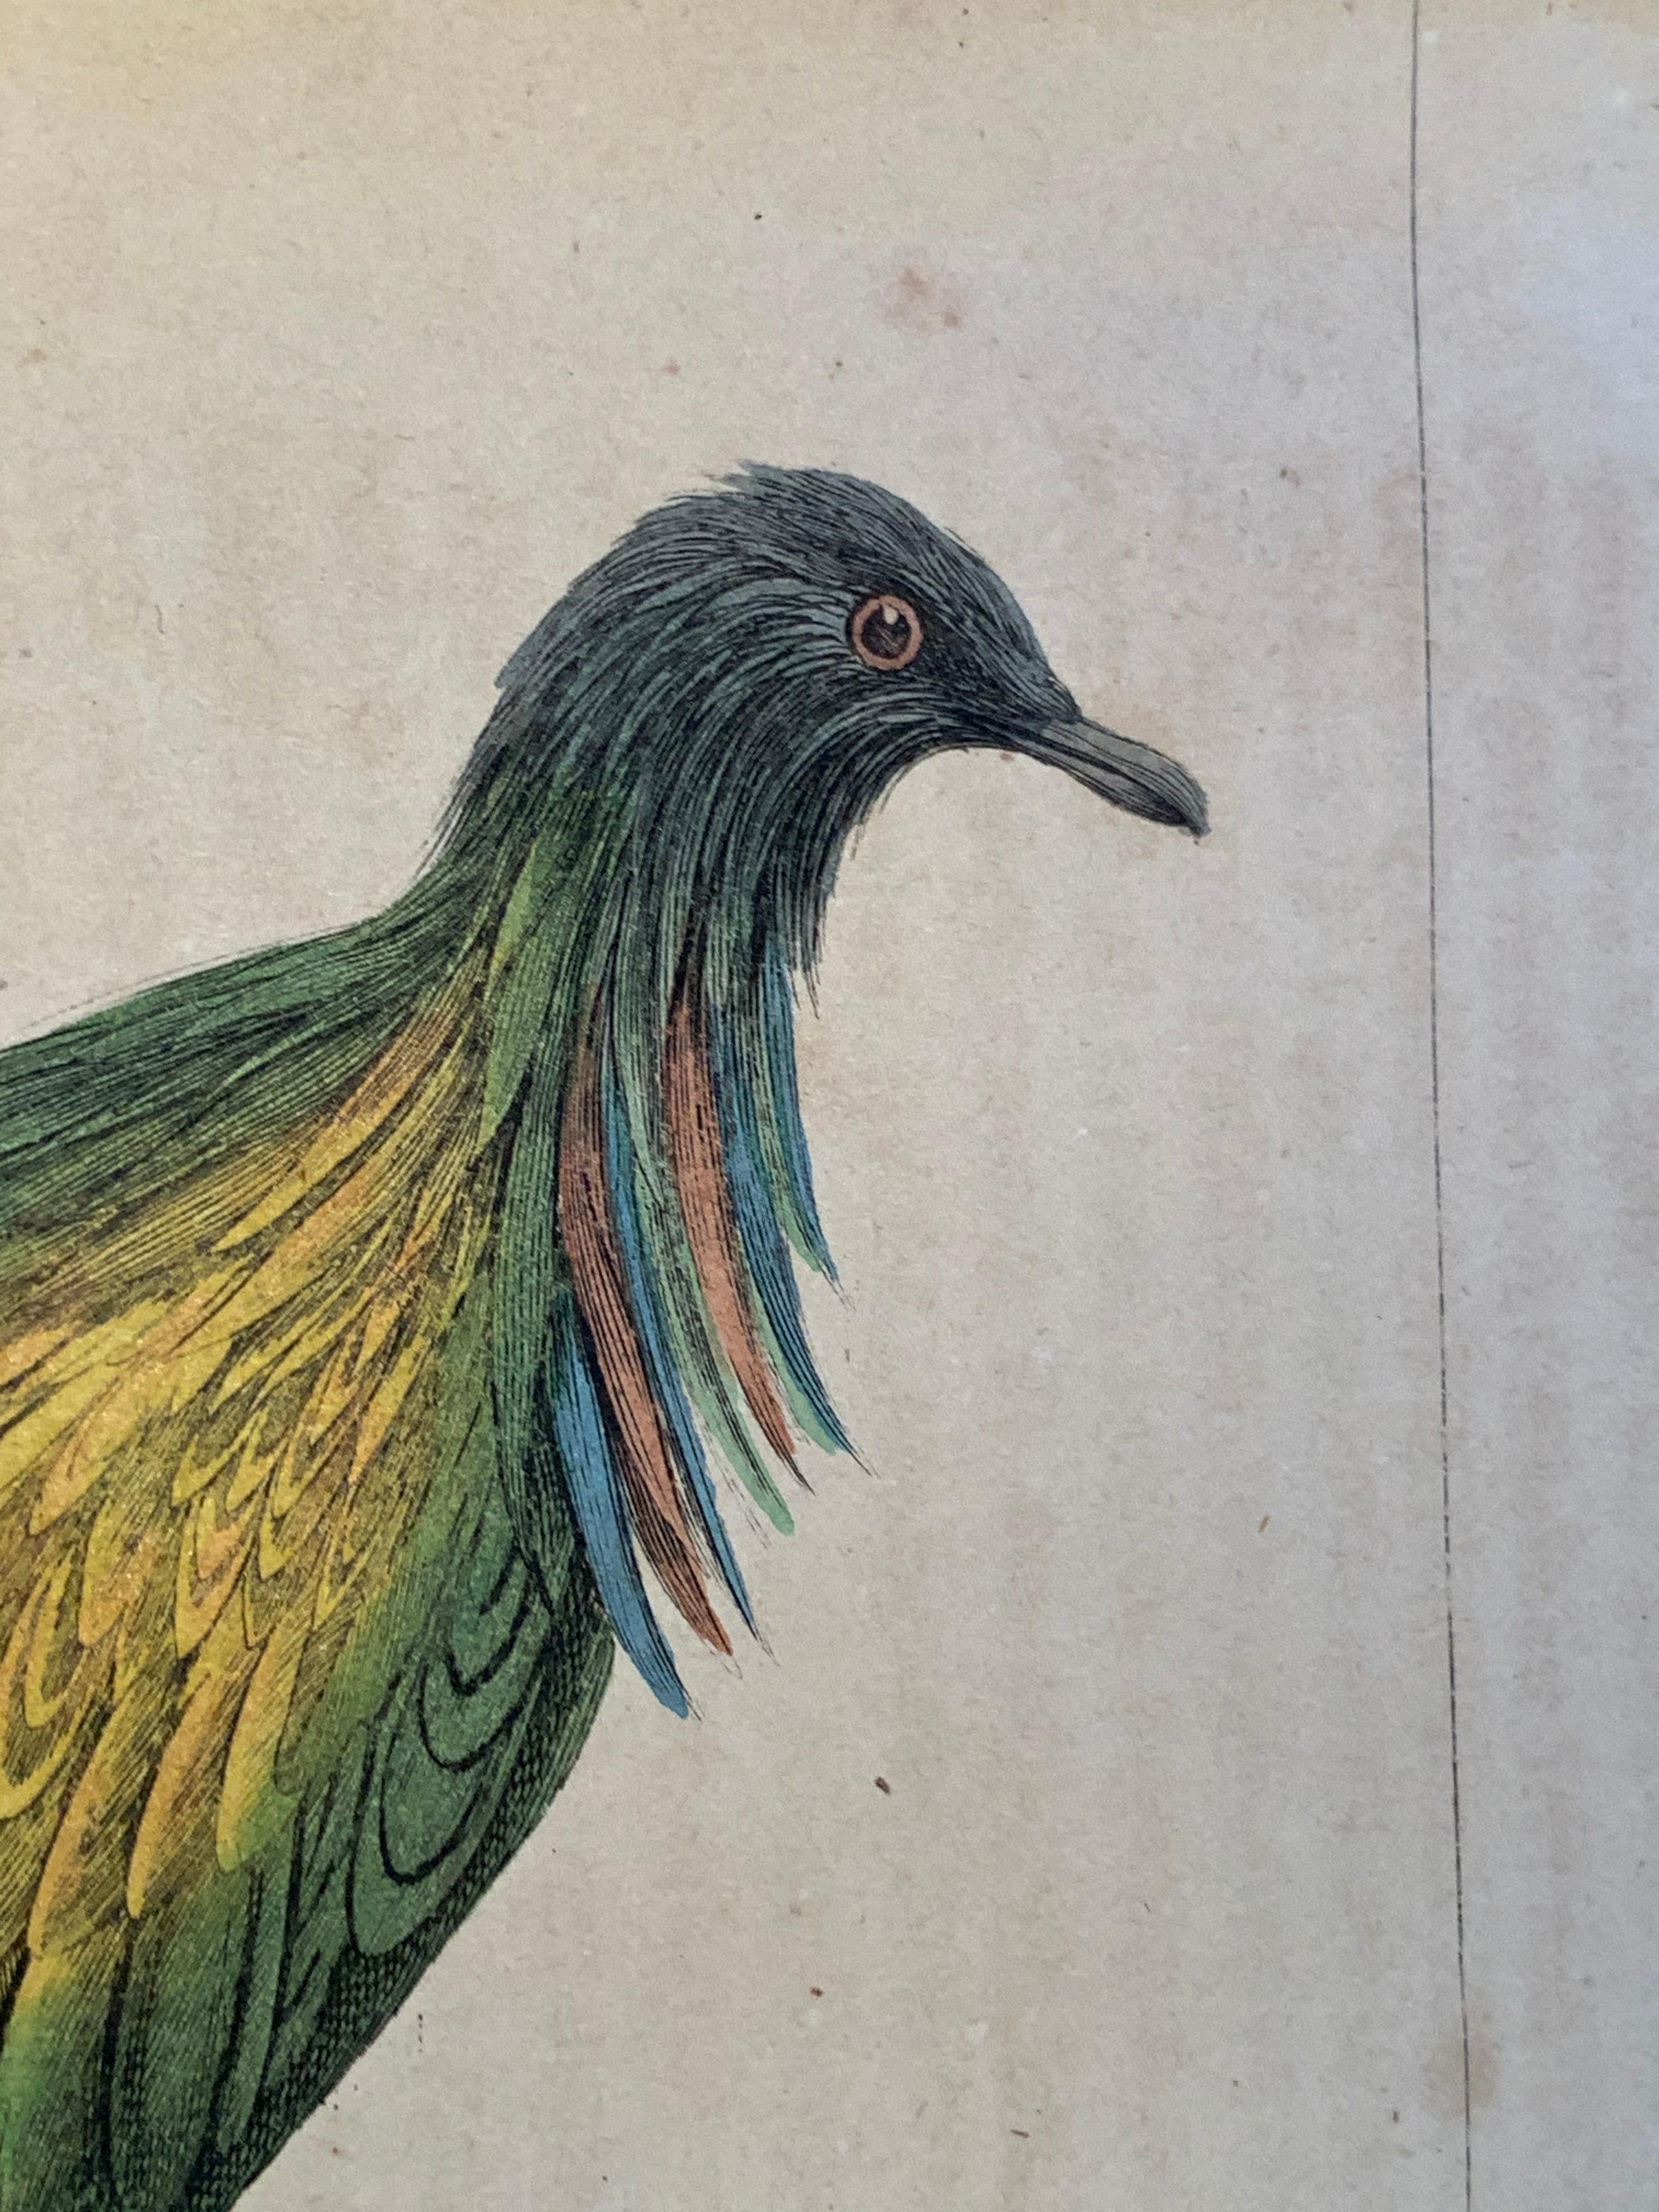 Set of 24 hand colored prints (12 sheets) of rare & colourful birds. Published in 1840 based on the work of Scottish naturalist, Sir William Jardine, 7th Baronet. 

Depicting amongst others a: Peacock, Great Argus, Pheasant, Nicobar Ground Pigeon,